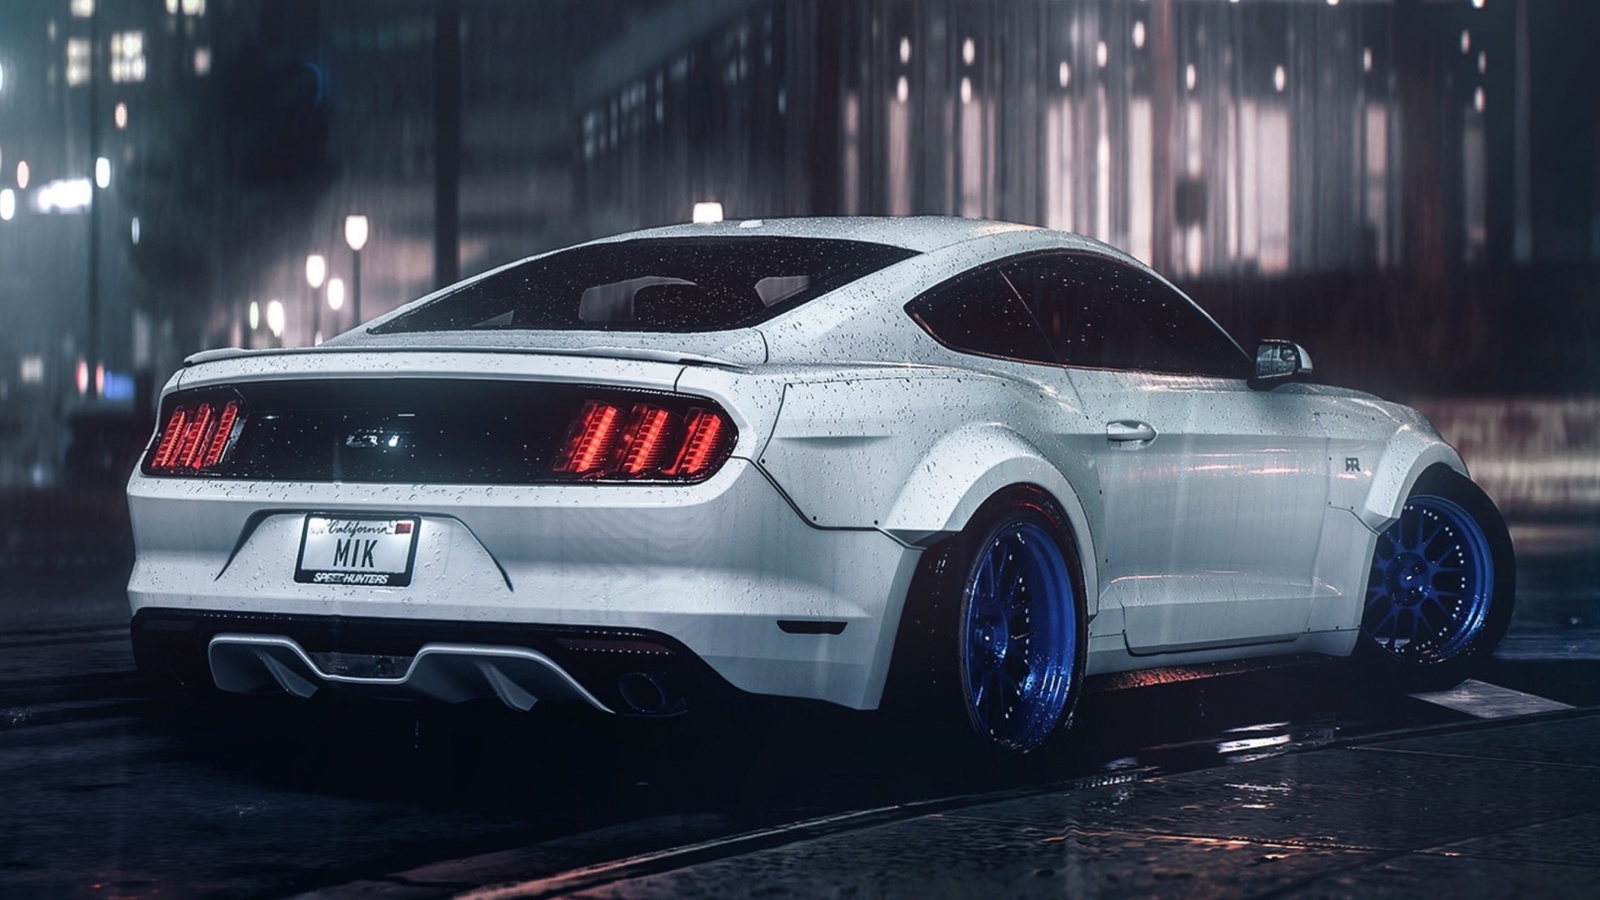 Ford Mustang Shelby GT350 wallpaper 1600x900